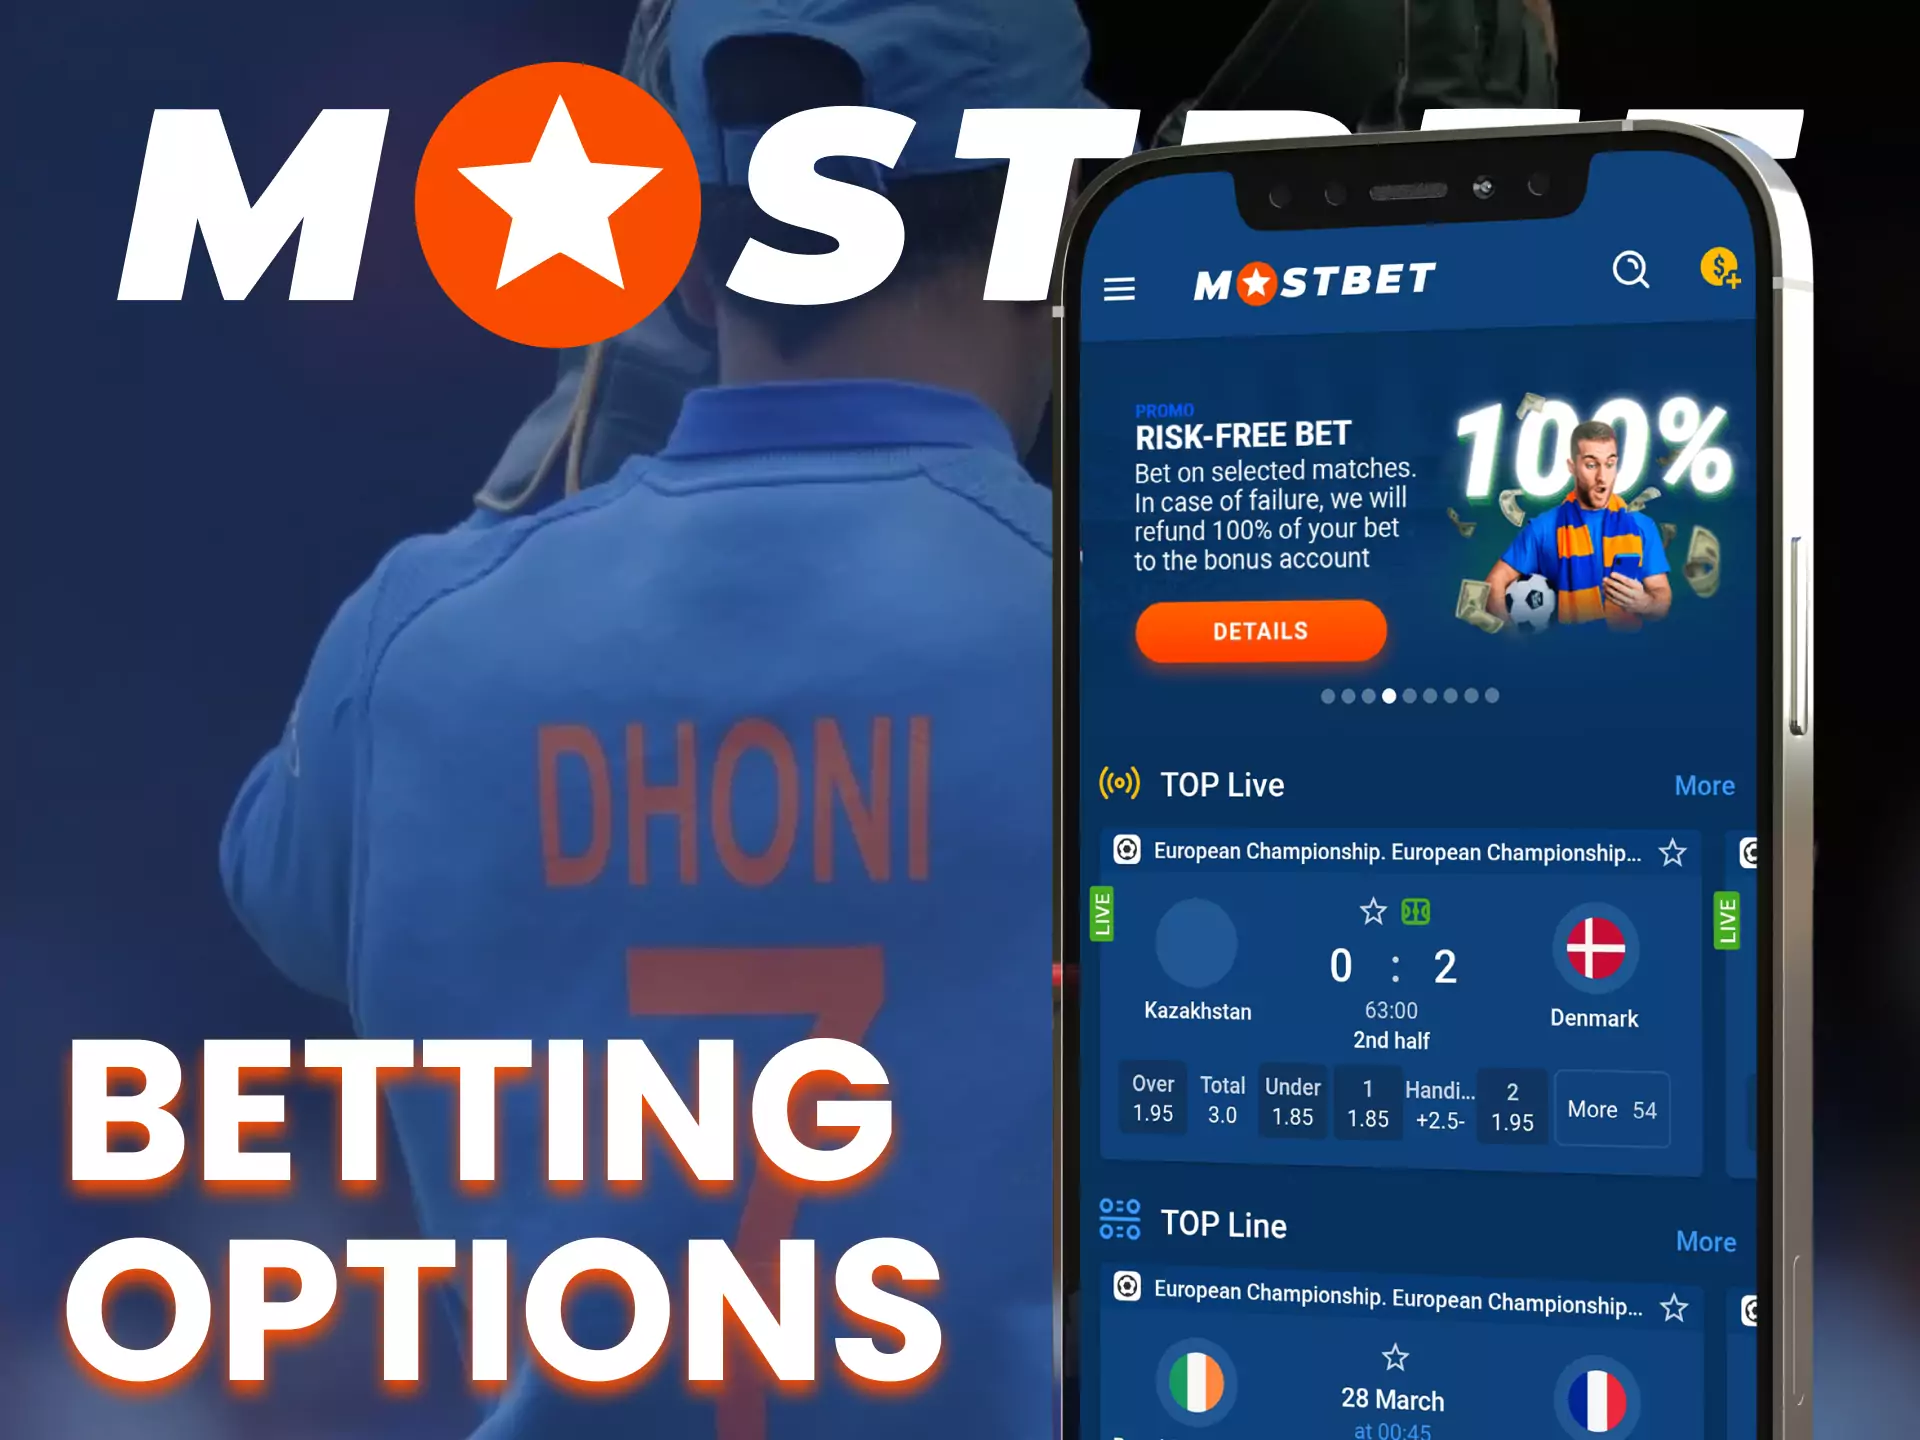 On the Mostbet app, try different sports betting options.